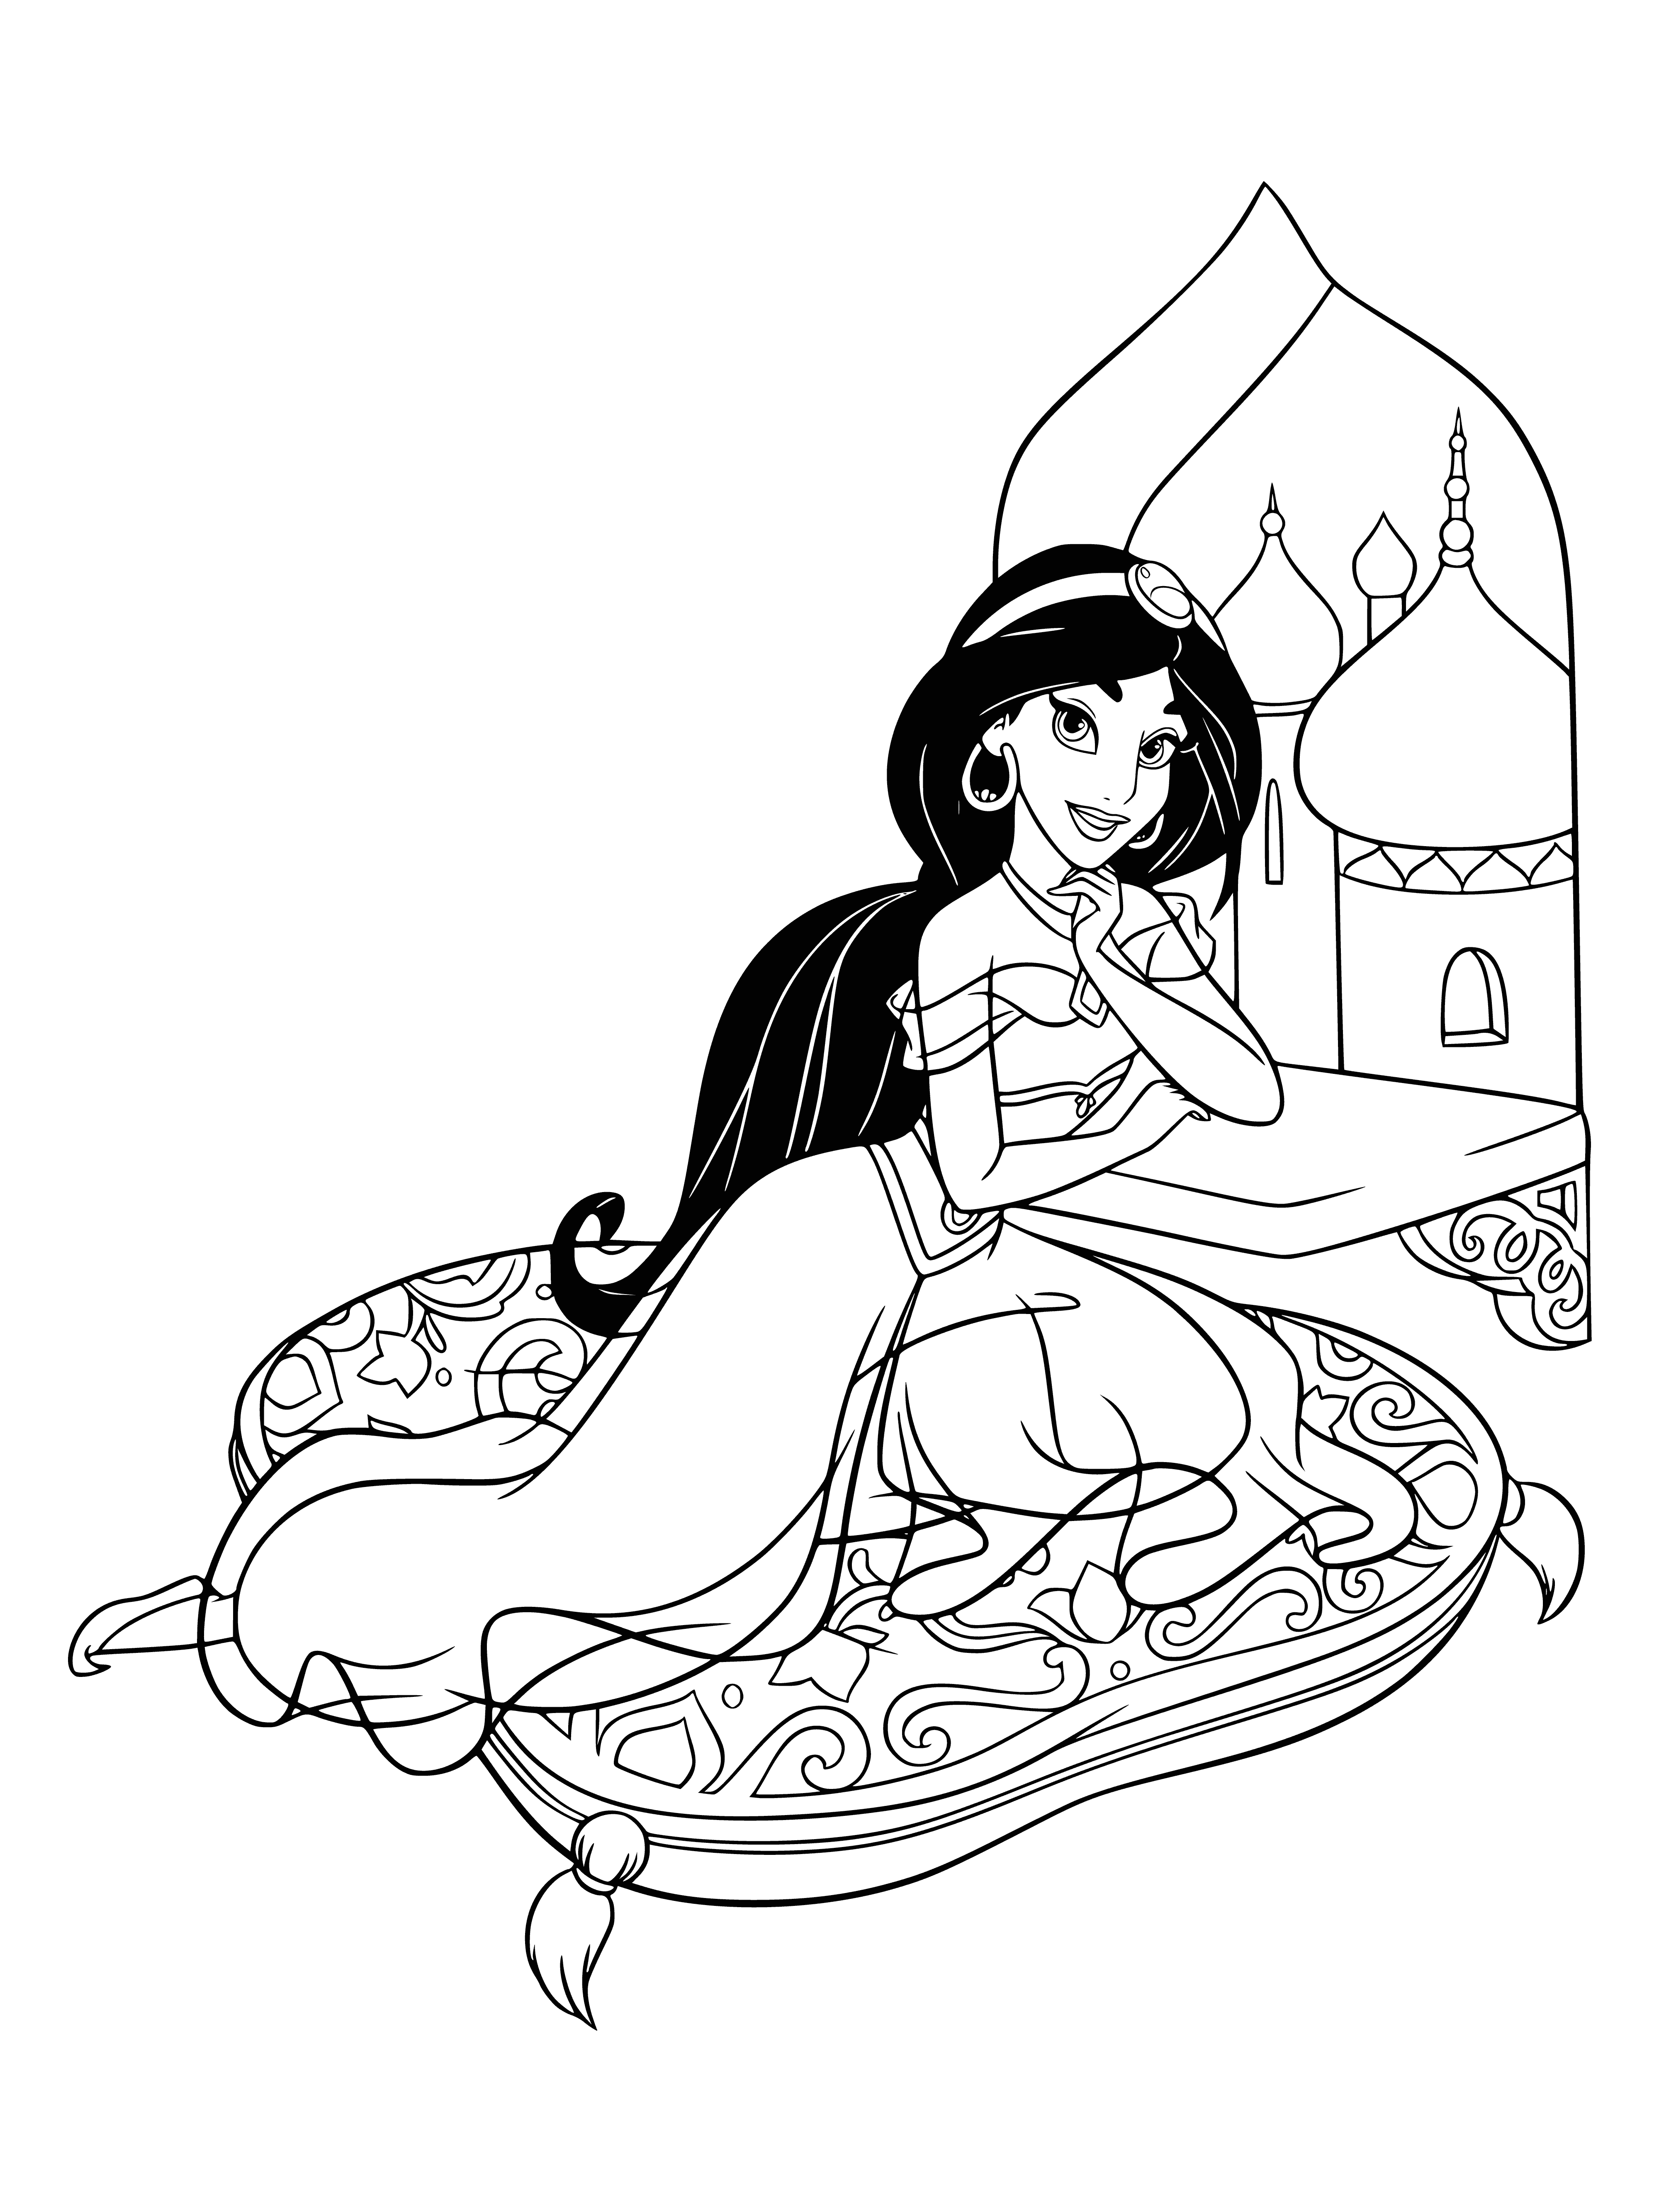 coloring page: Jasmine admires the palace view wearing a purple and gold outfit, a flower in her hair.